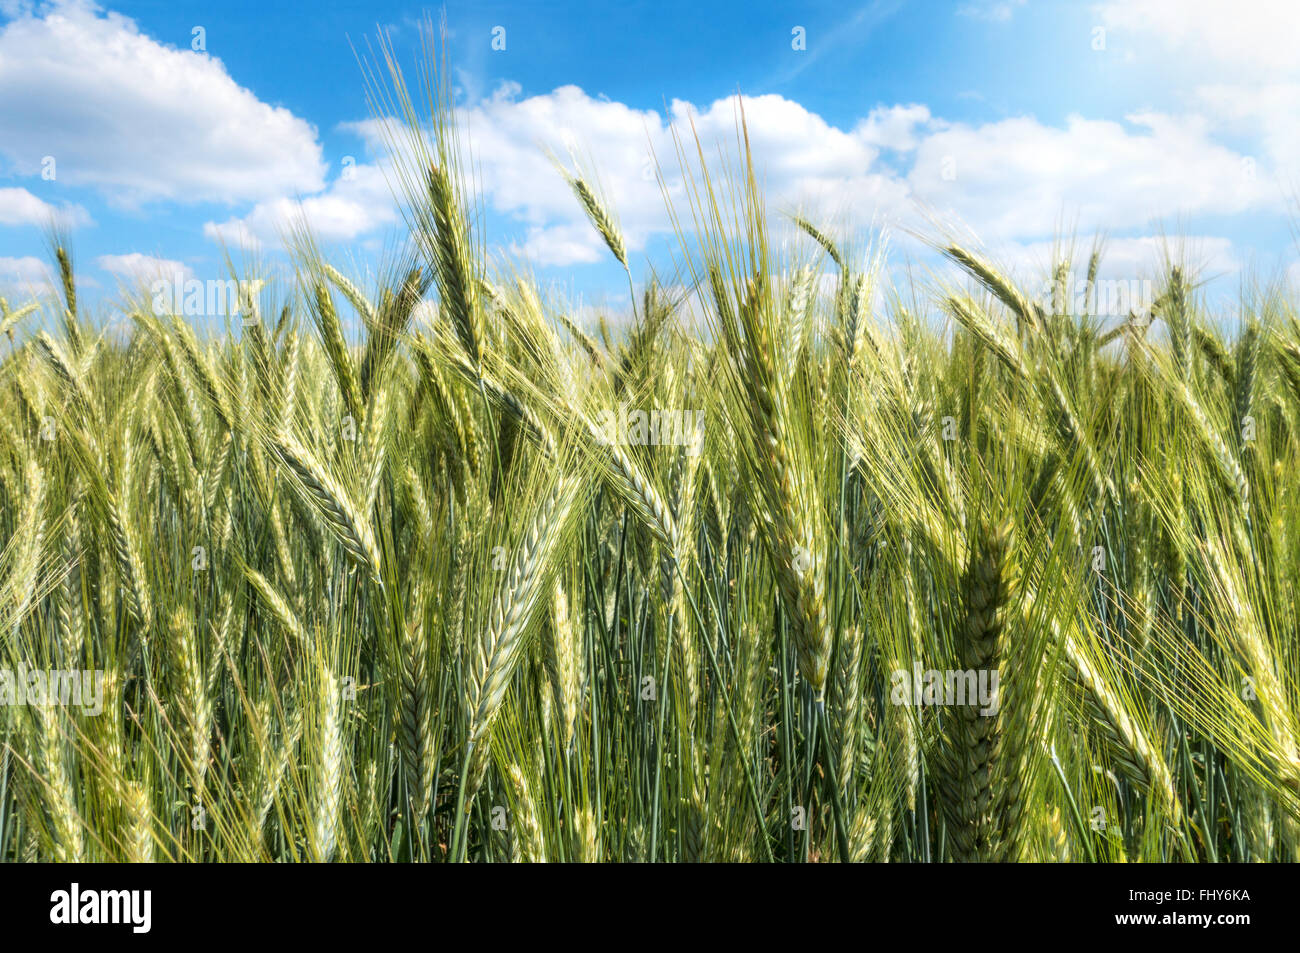 Green barley in close-up in a field against blue and white sky Stock Photo